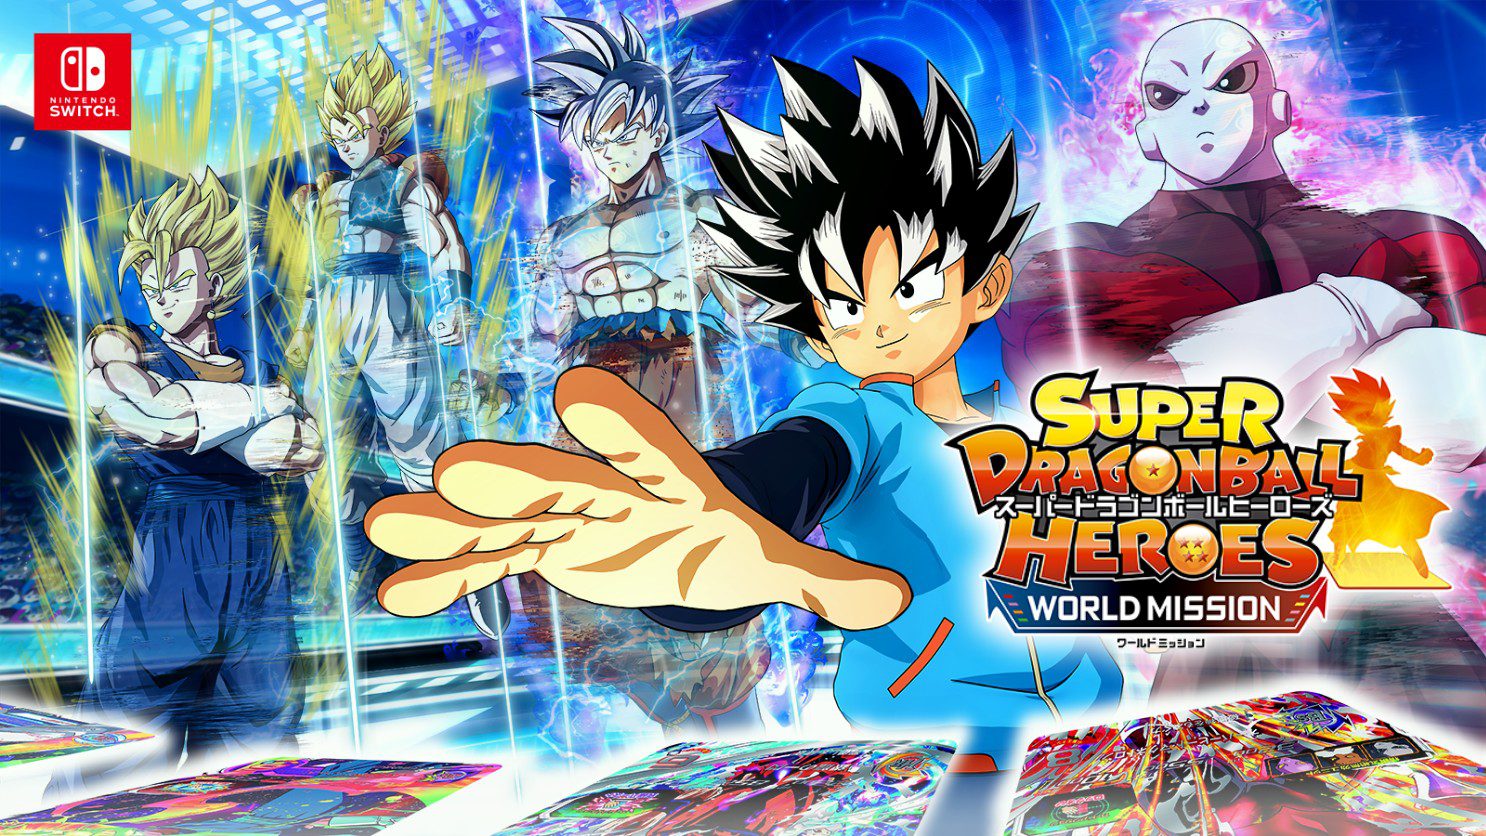 Super Dragon Ball Heroes World Mission coming West